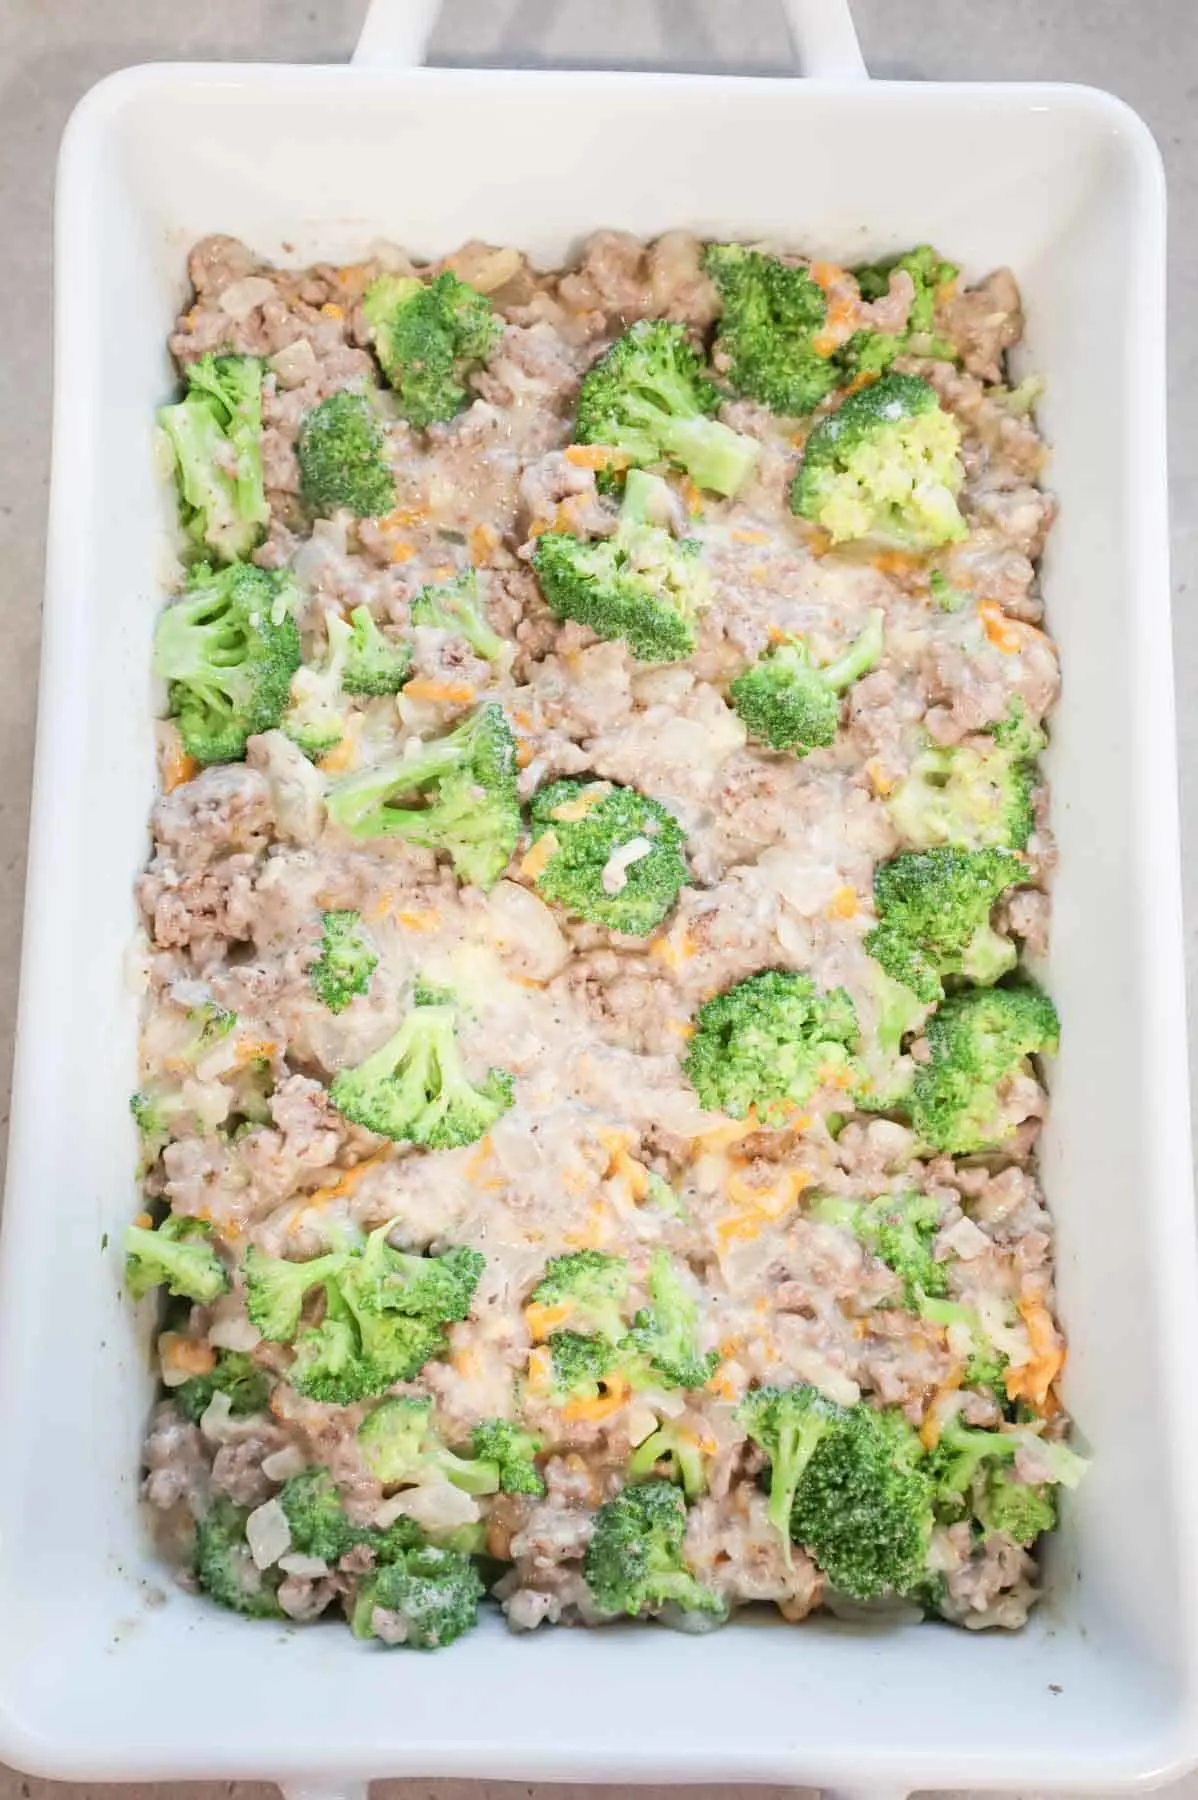 creamy ground beef and broccoli mixture in a casserole